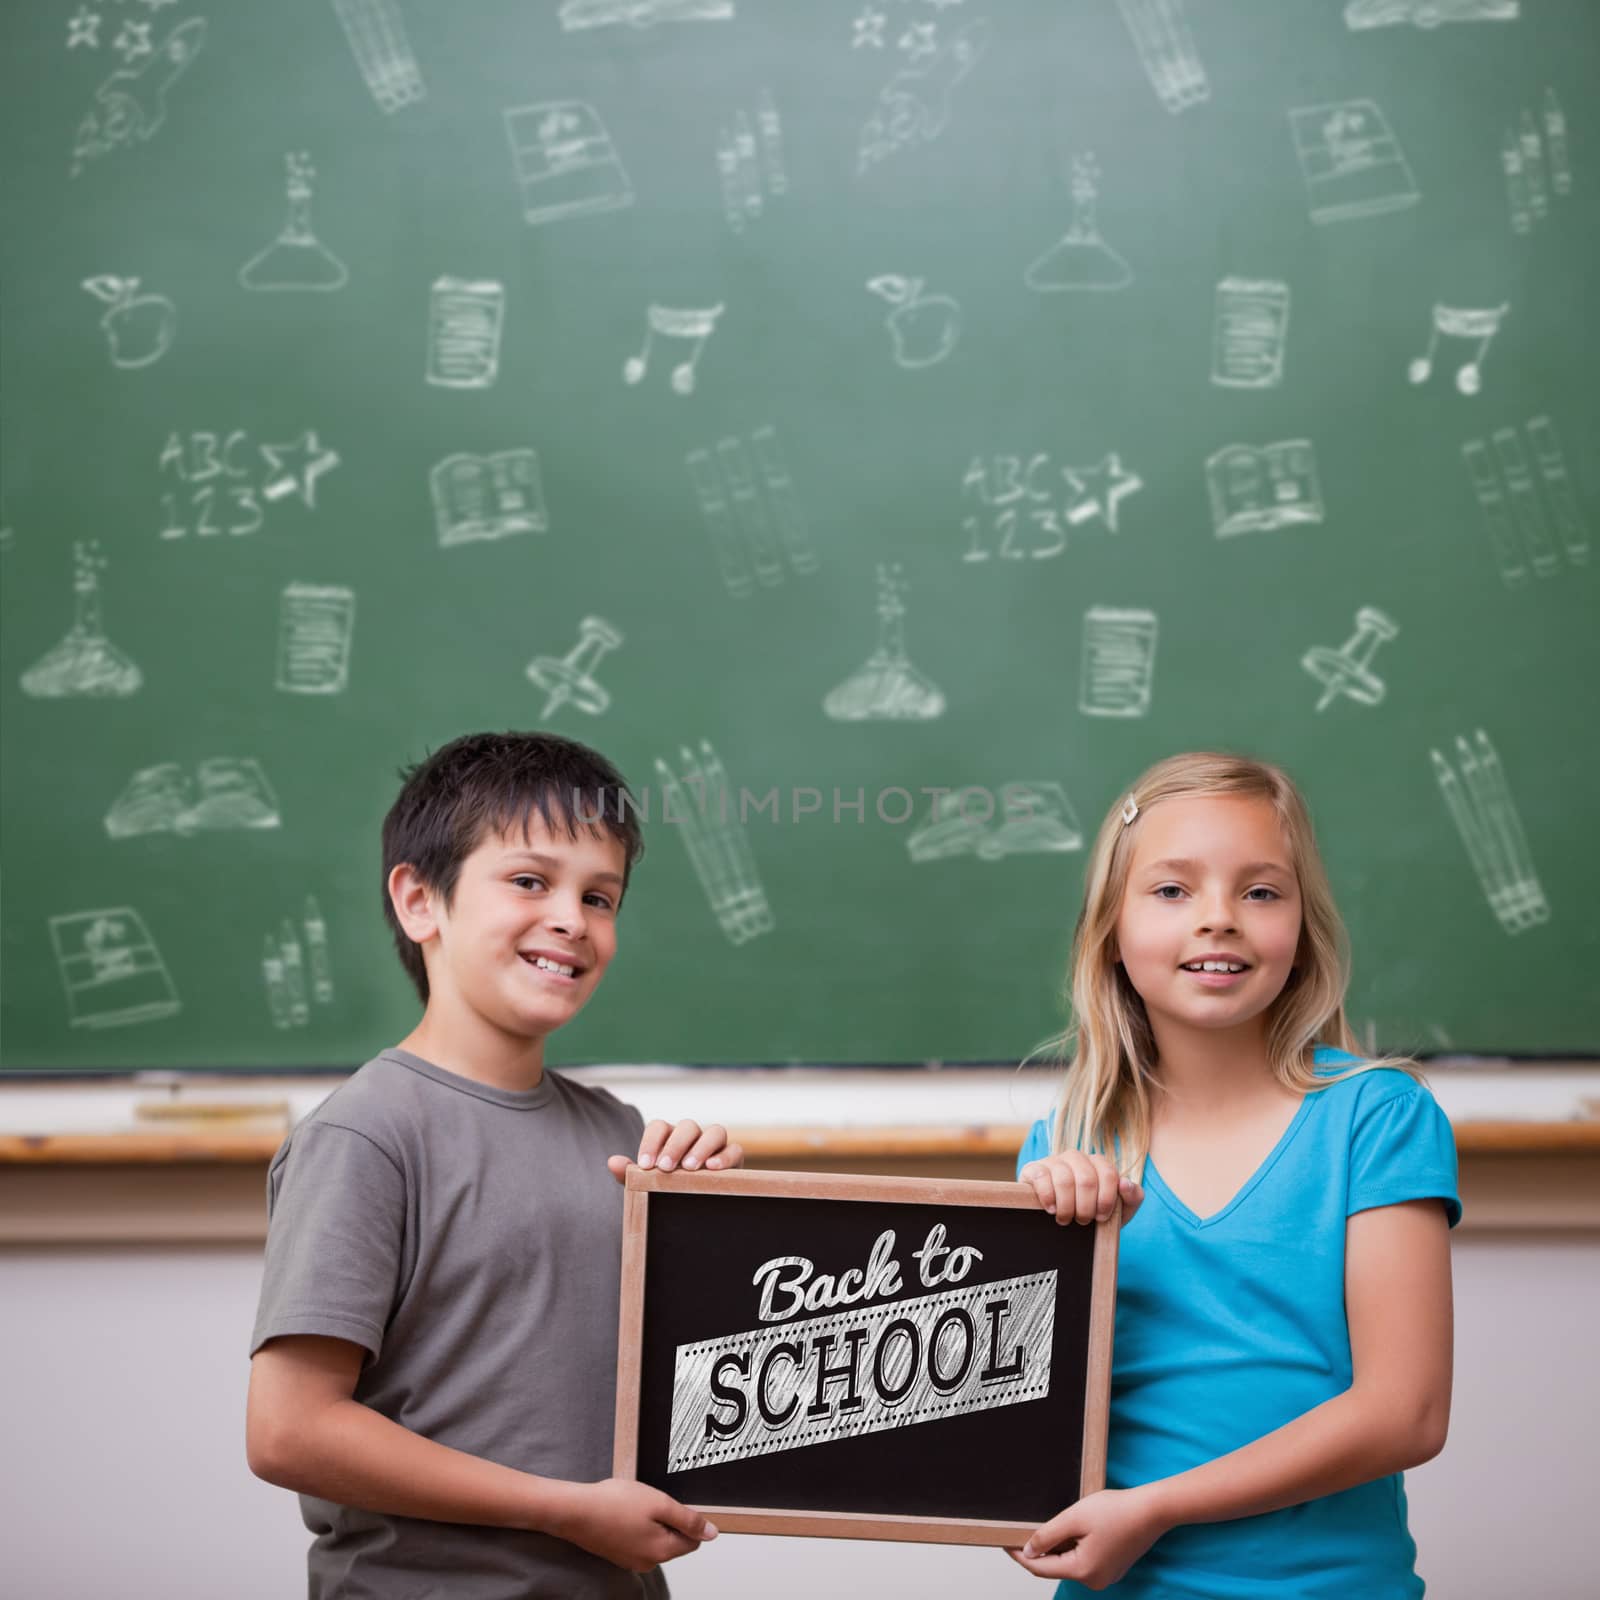 Back to school message against cute pupils showing chalkboard